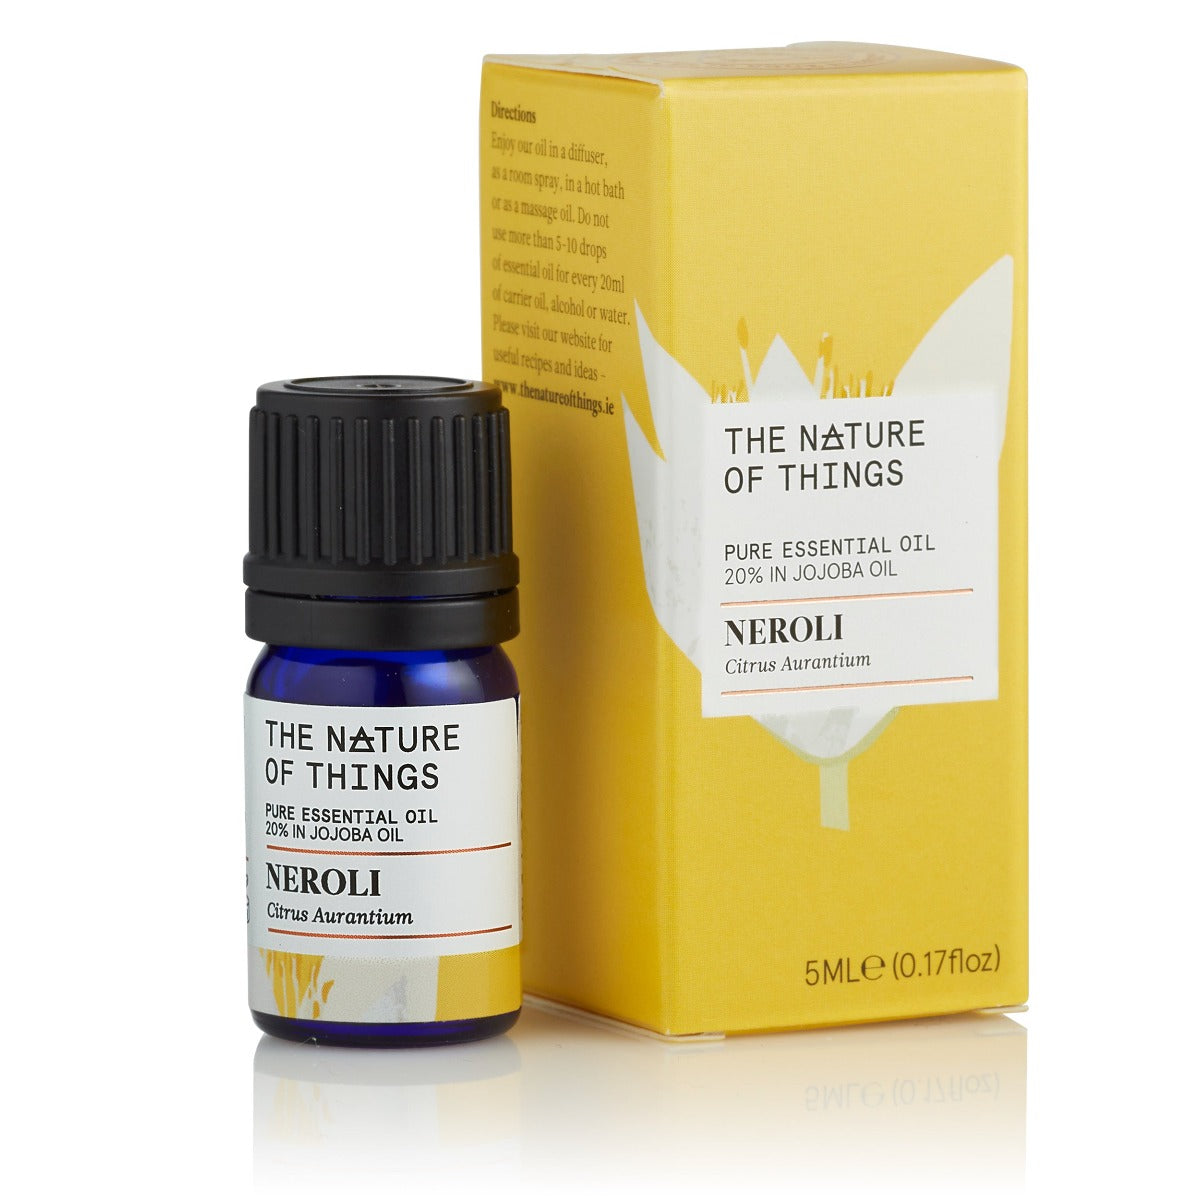 Neroli Essential Oil from The Nature of Things